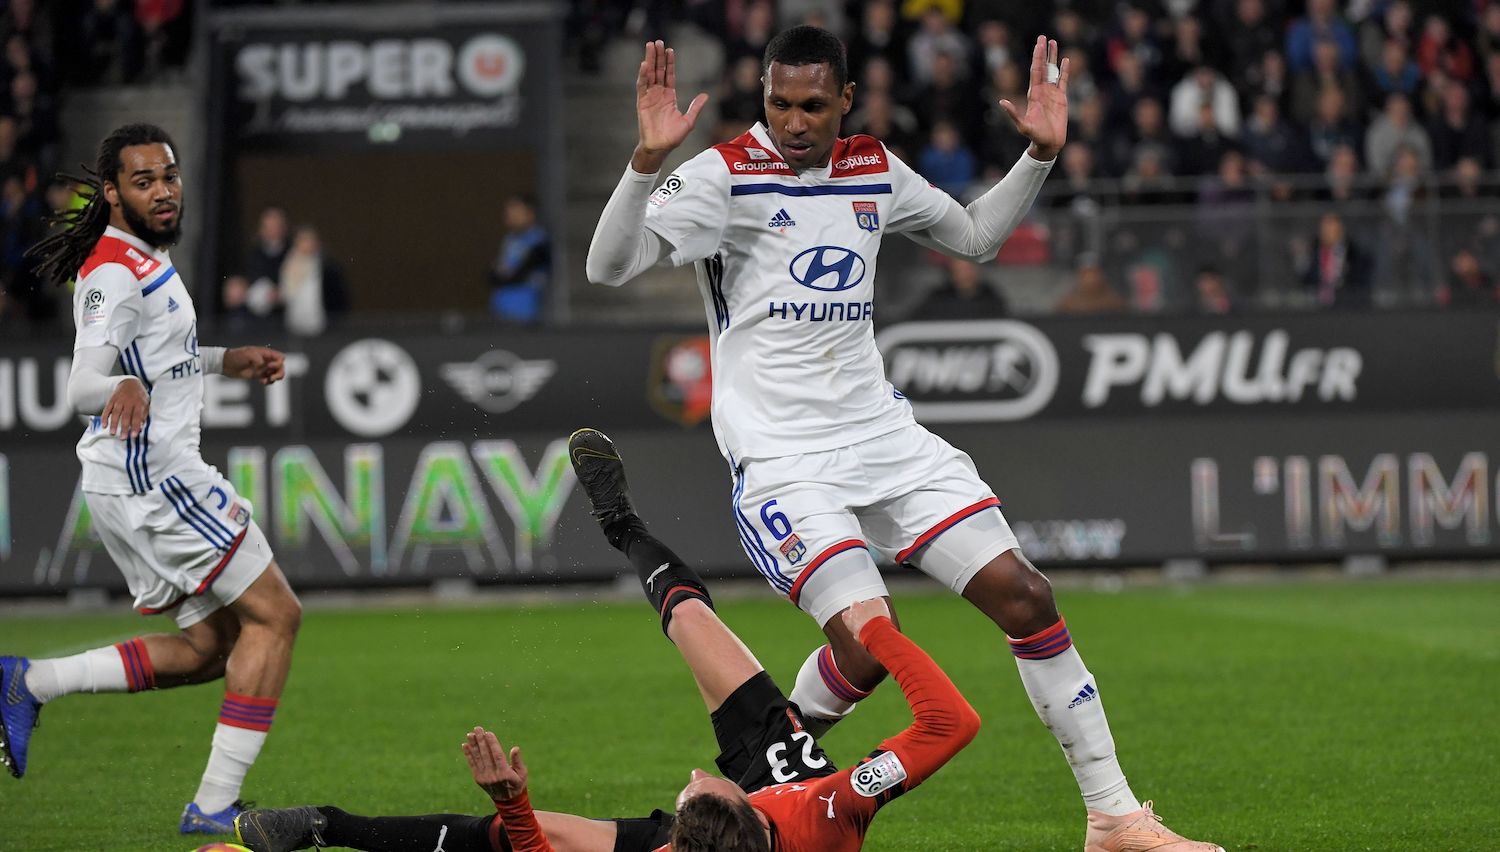 Rennes' French midfielder Adrien Hunou (L) vies with Lyon's Brazilian defender Marcelo during the French L1 football match Stade Rennais vs Olympique Lyonnais (OL), on March 29, 2019 at the Roazhon Park stadium in Rennes, western France. (Photo by LOIC VENANCE / AFP) (Photo credit should read LOIC VENANCE/AFP via Getty Images)